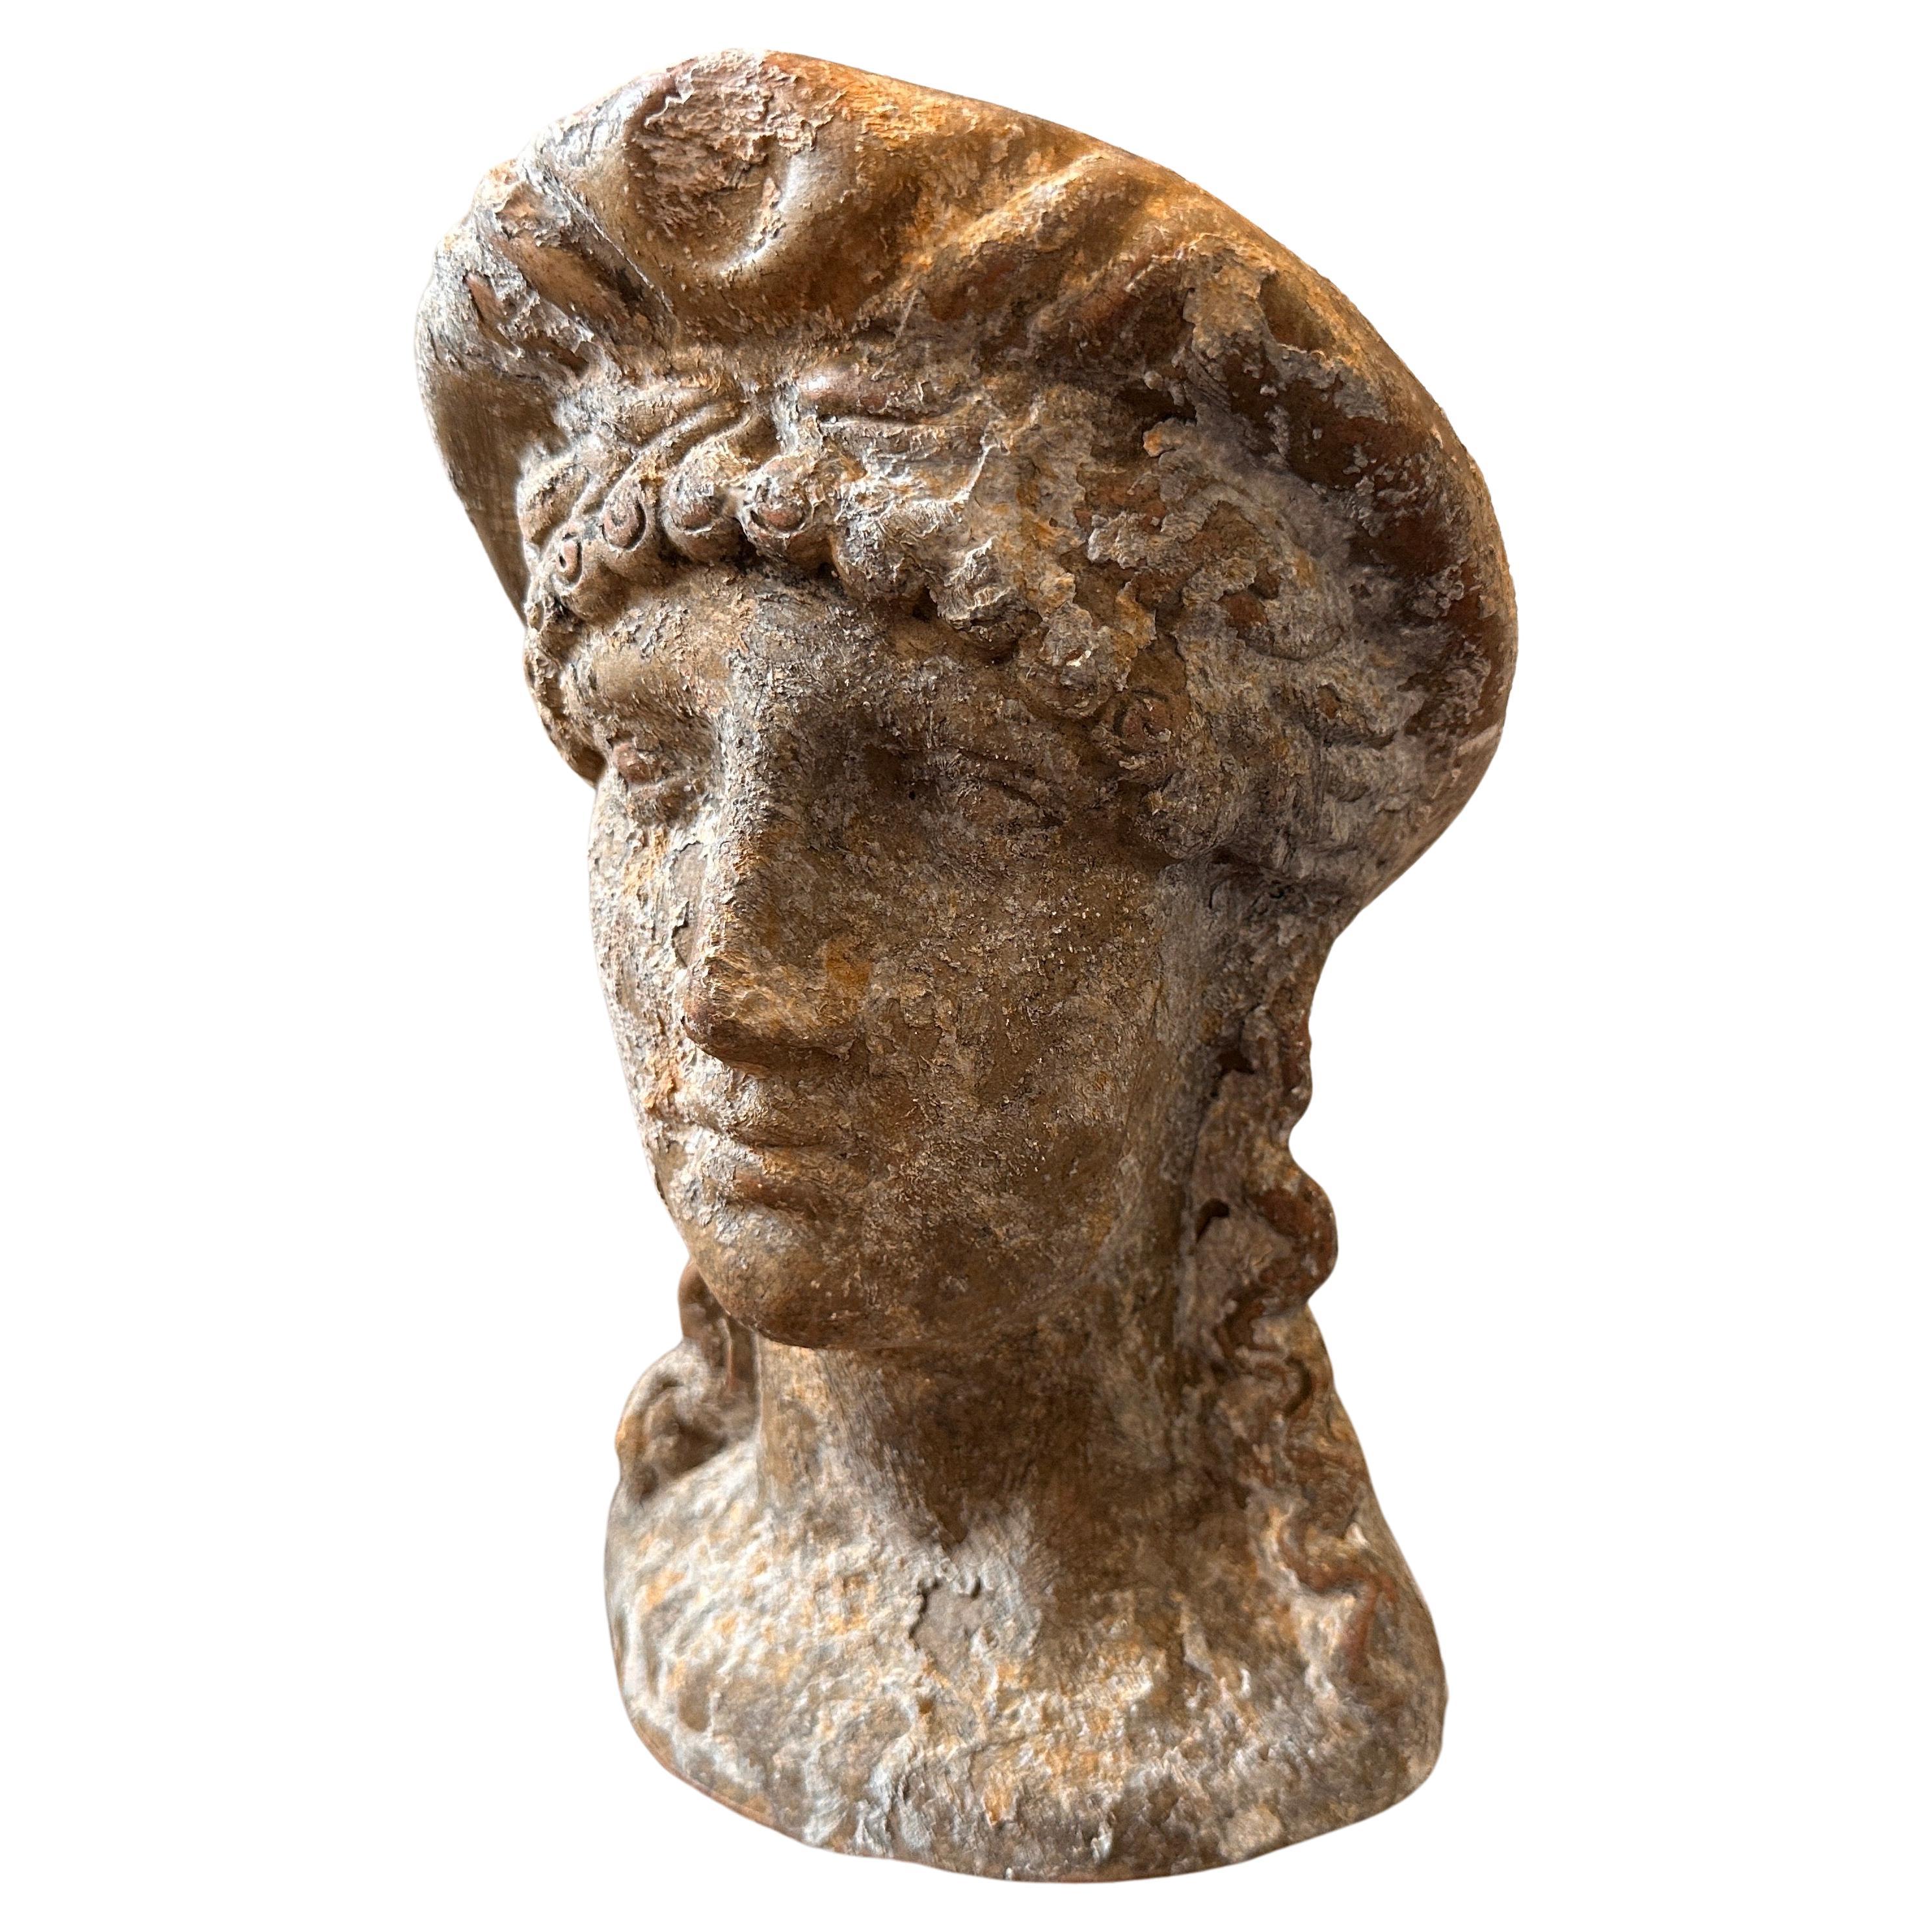 In the 1930s, during a period of artistic revival, a remarkable Greek Roman-style hand-crafted terracotta Sicilian woman head was created, showcasing the fusion of ancient Greek and Roman artistic influences with Sicilian craftsmanship, the